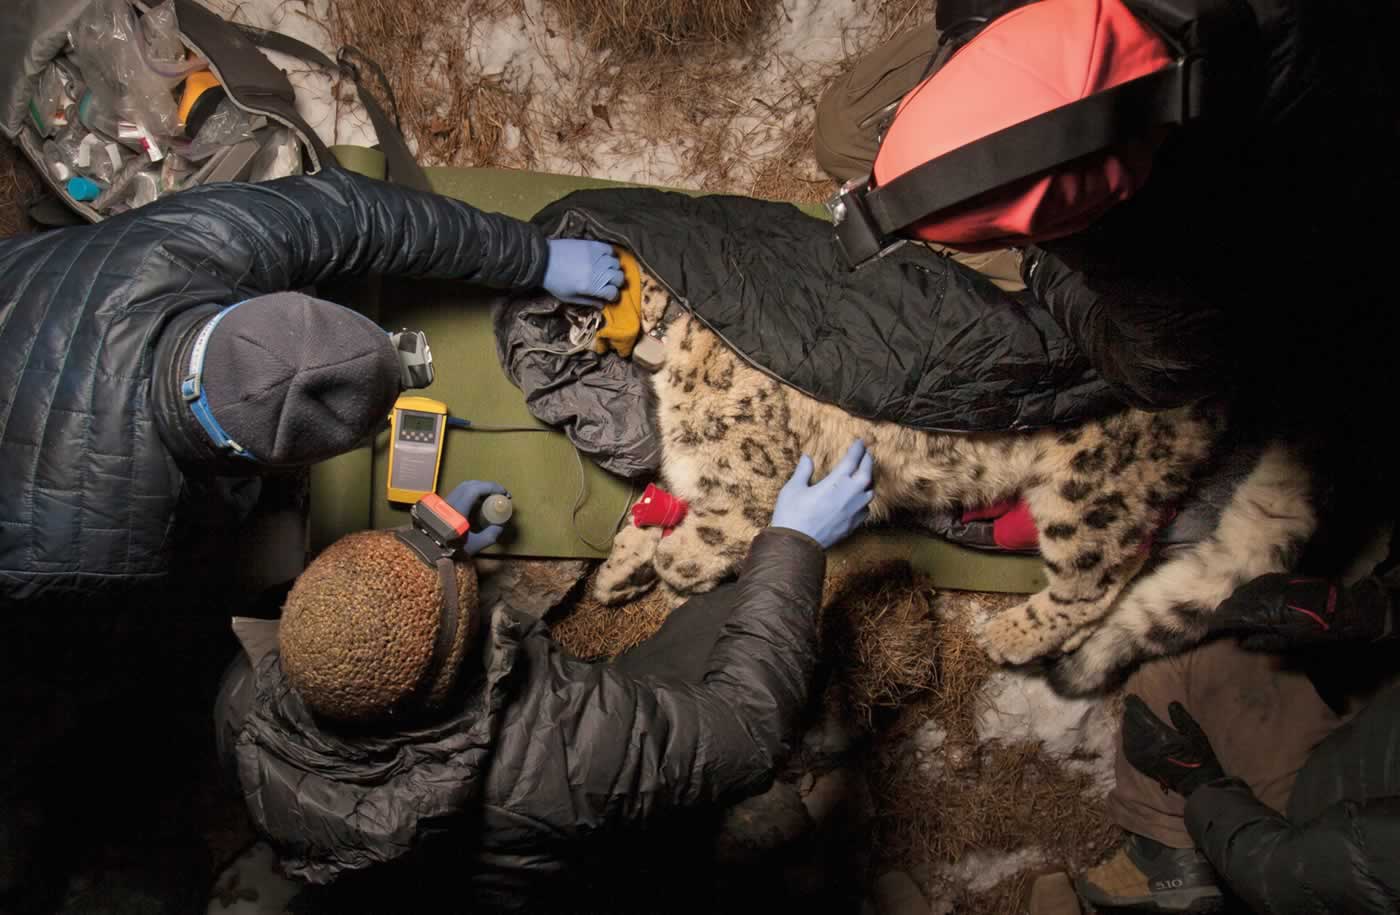 In eastern Kyrgyzstan, biologists and a veterinarian fit a tranquilized snow leopard with a tracking collar. They also take readings of its weight and dimensions as well as samples of blood and fur in the effort to understand its range and well-being.